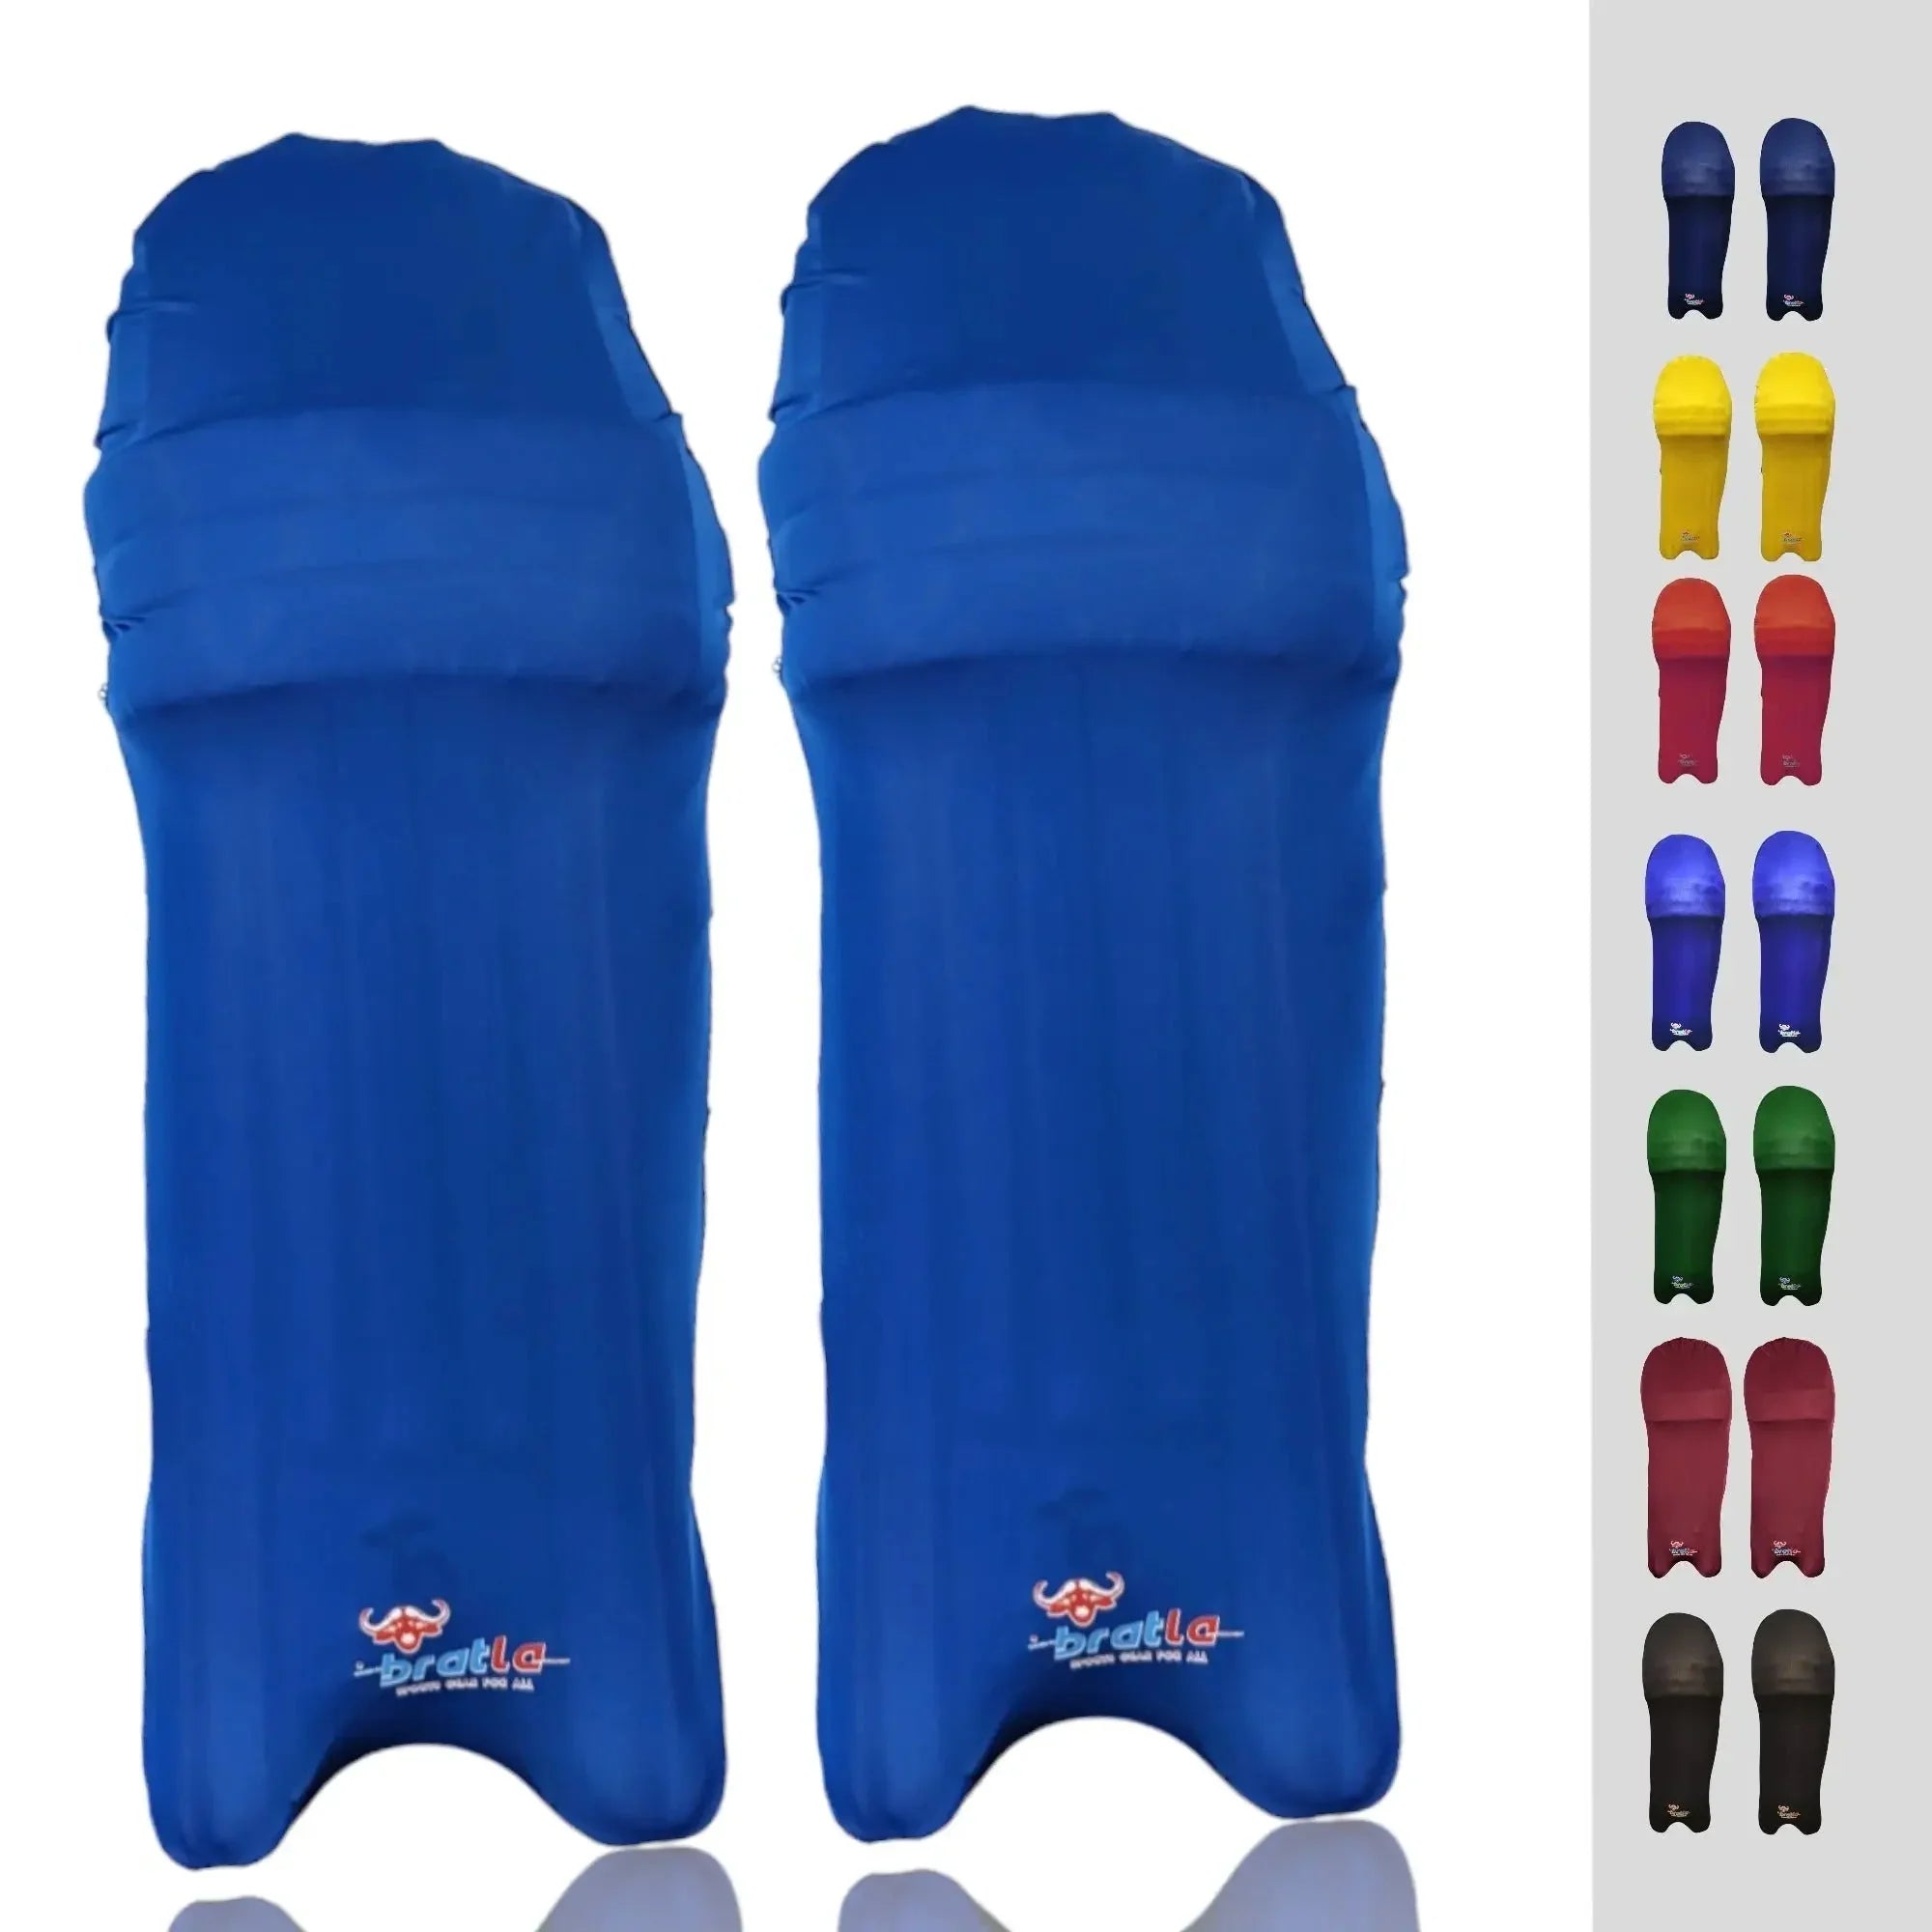 Bratla Cricket Batting Pad Covers Fit Neatly Easily Put On - Royal Blue - PADS - BATTING COVER